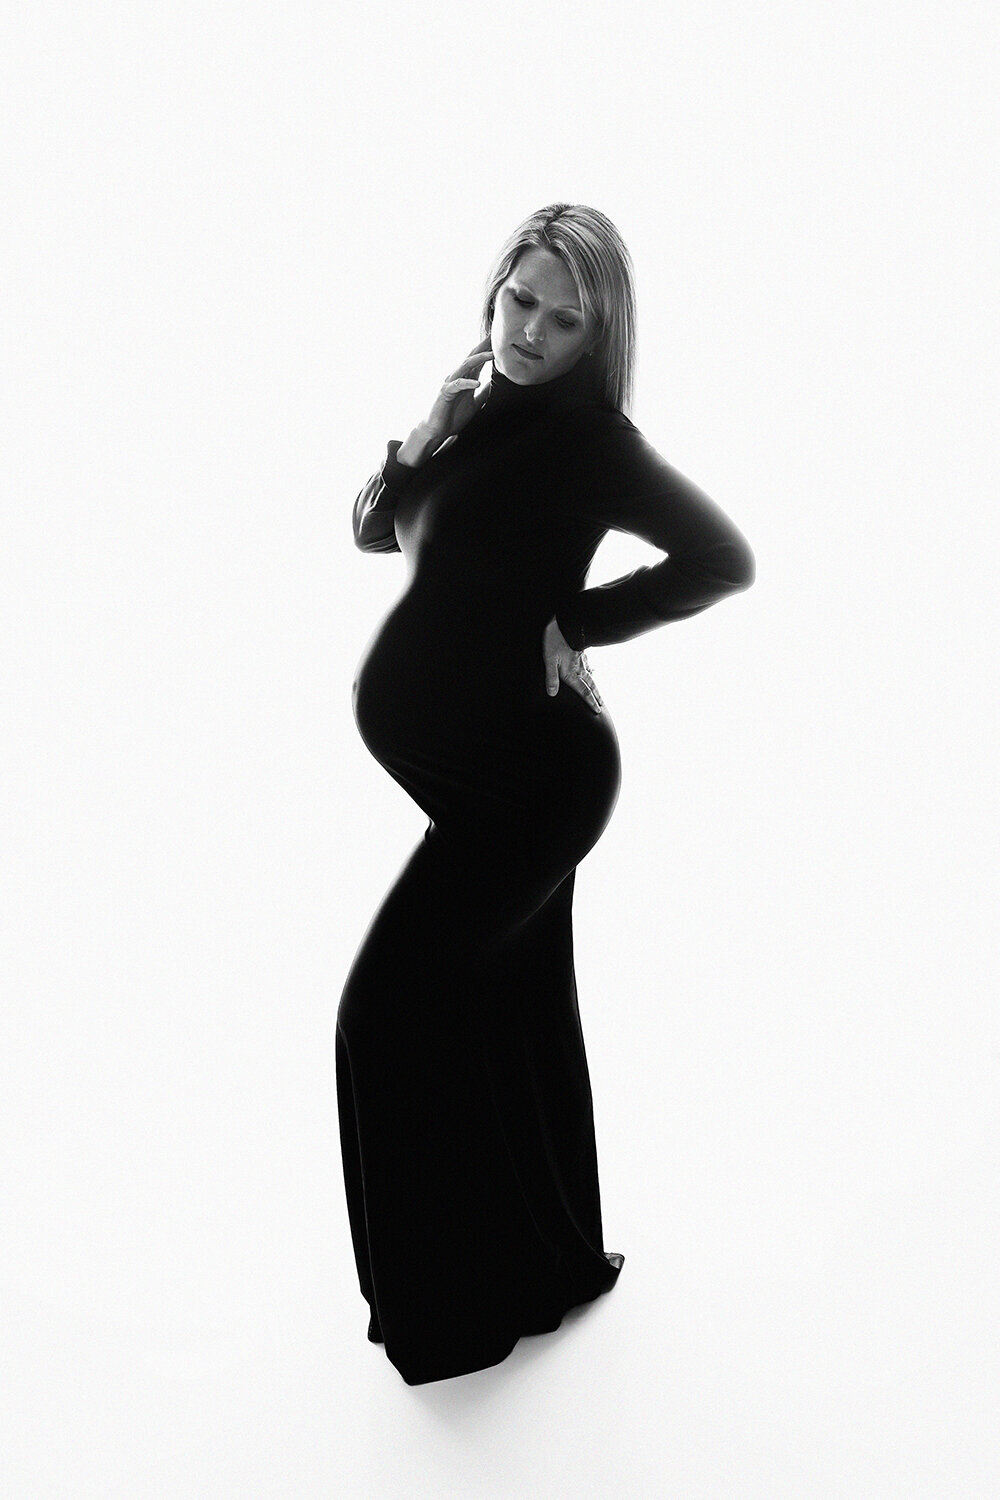 New-Orleans-maternity-photographer-18